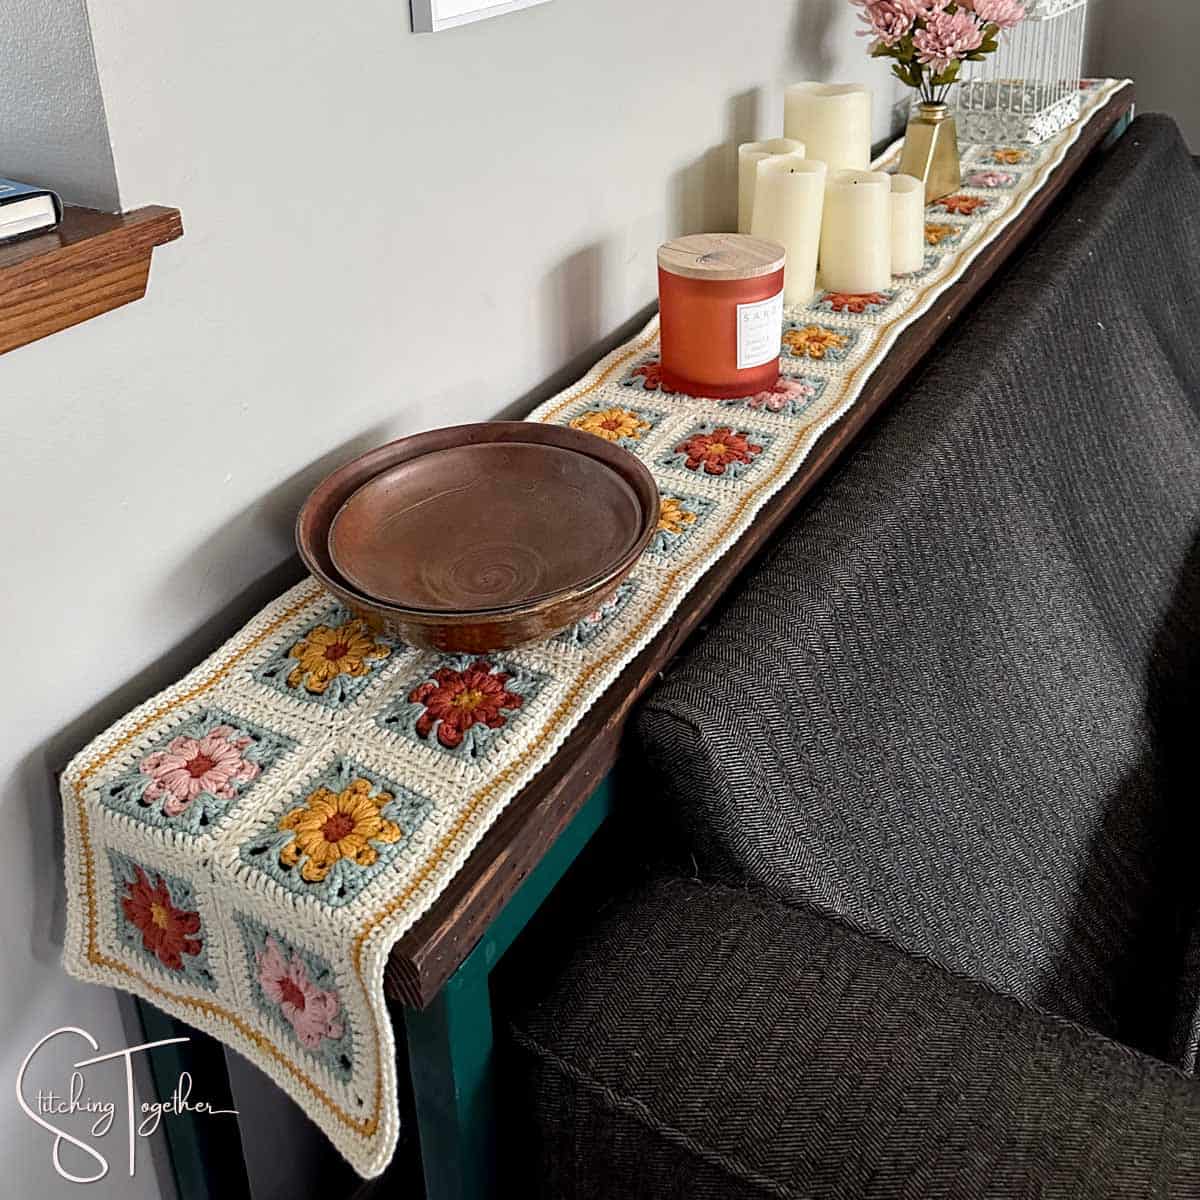 decorated sofa table with a boho crochet table runner on it